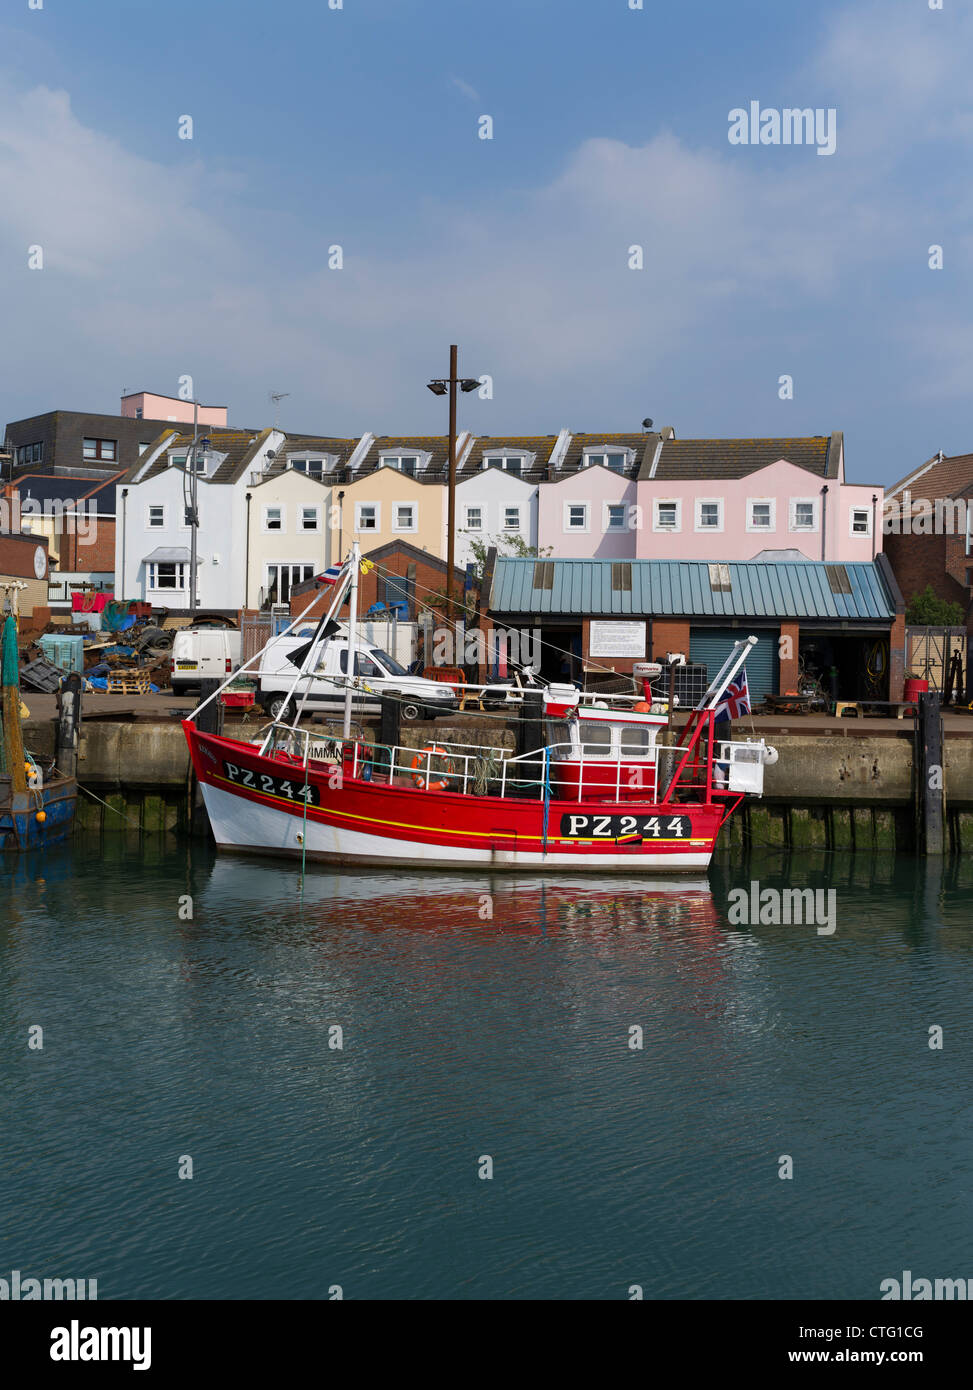 dh Old Portsmouth PORTSMOUTH HAMPSHIRE Fischerboote entlang Kai Portsmouth Hafen Camber Docks Boot england uk City Stockfoto